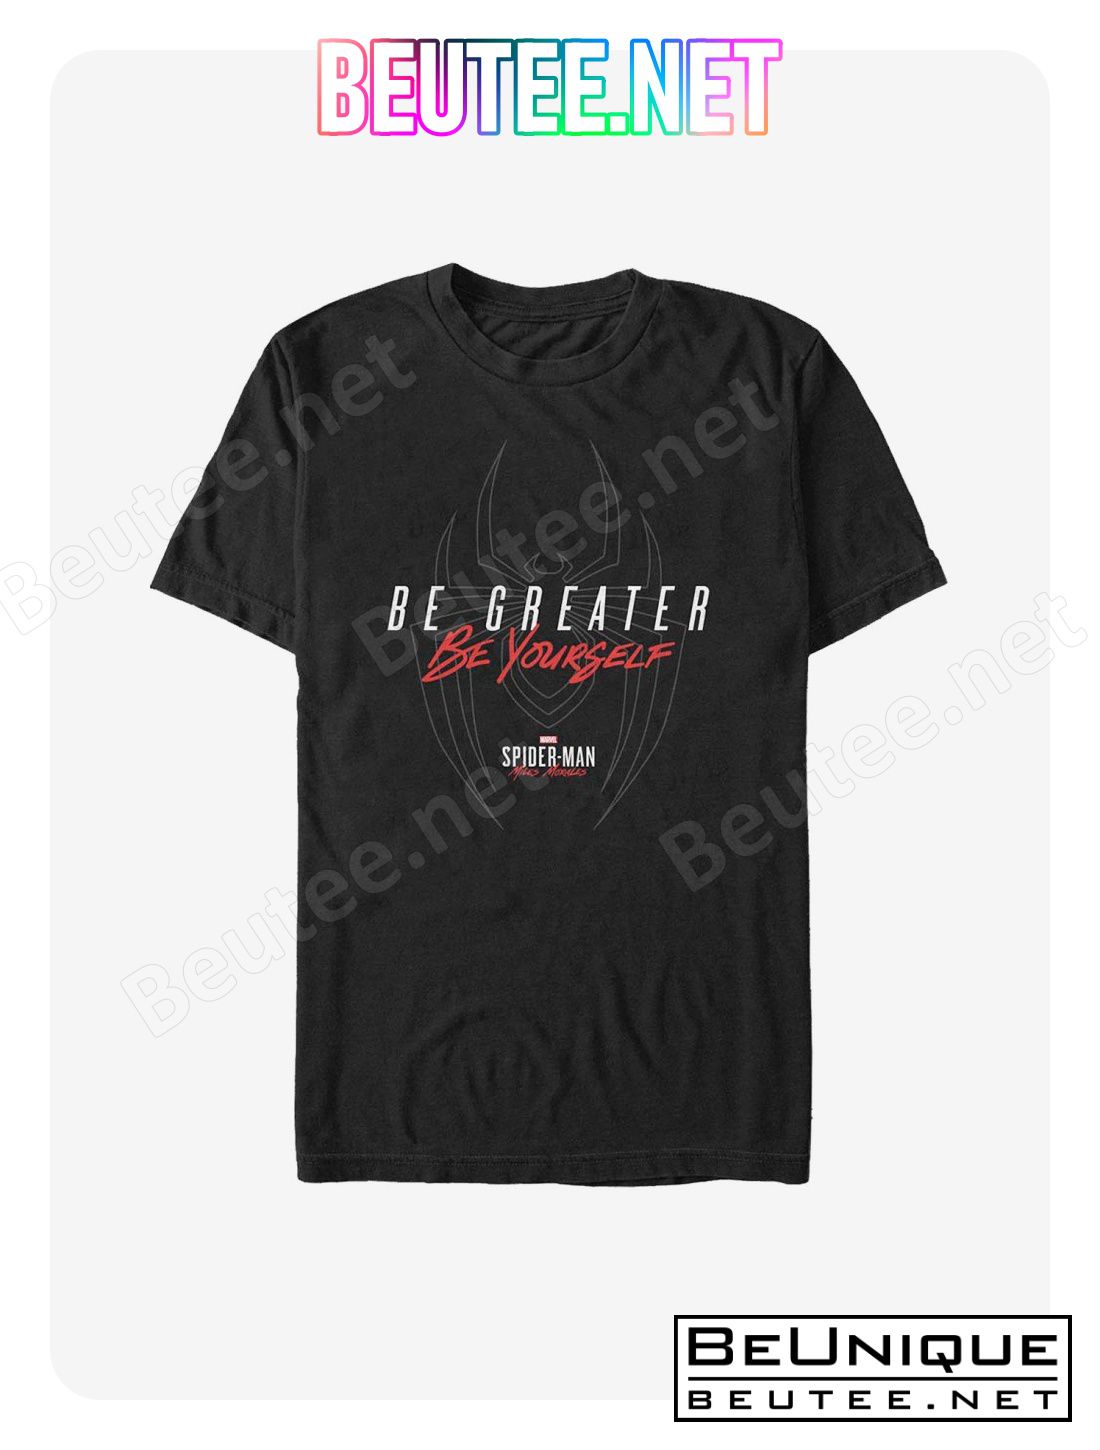 Marvel Spider-Man Miles Morales Be Greater Be Yourself T-Shirt